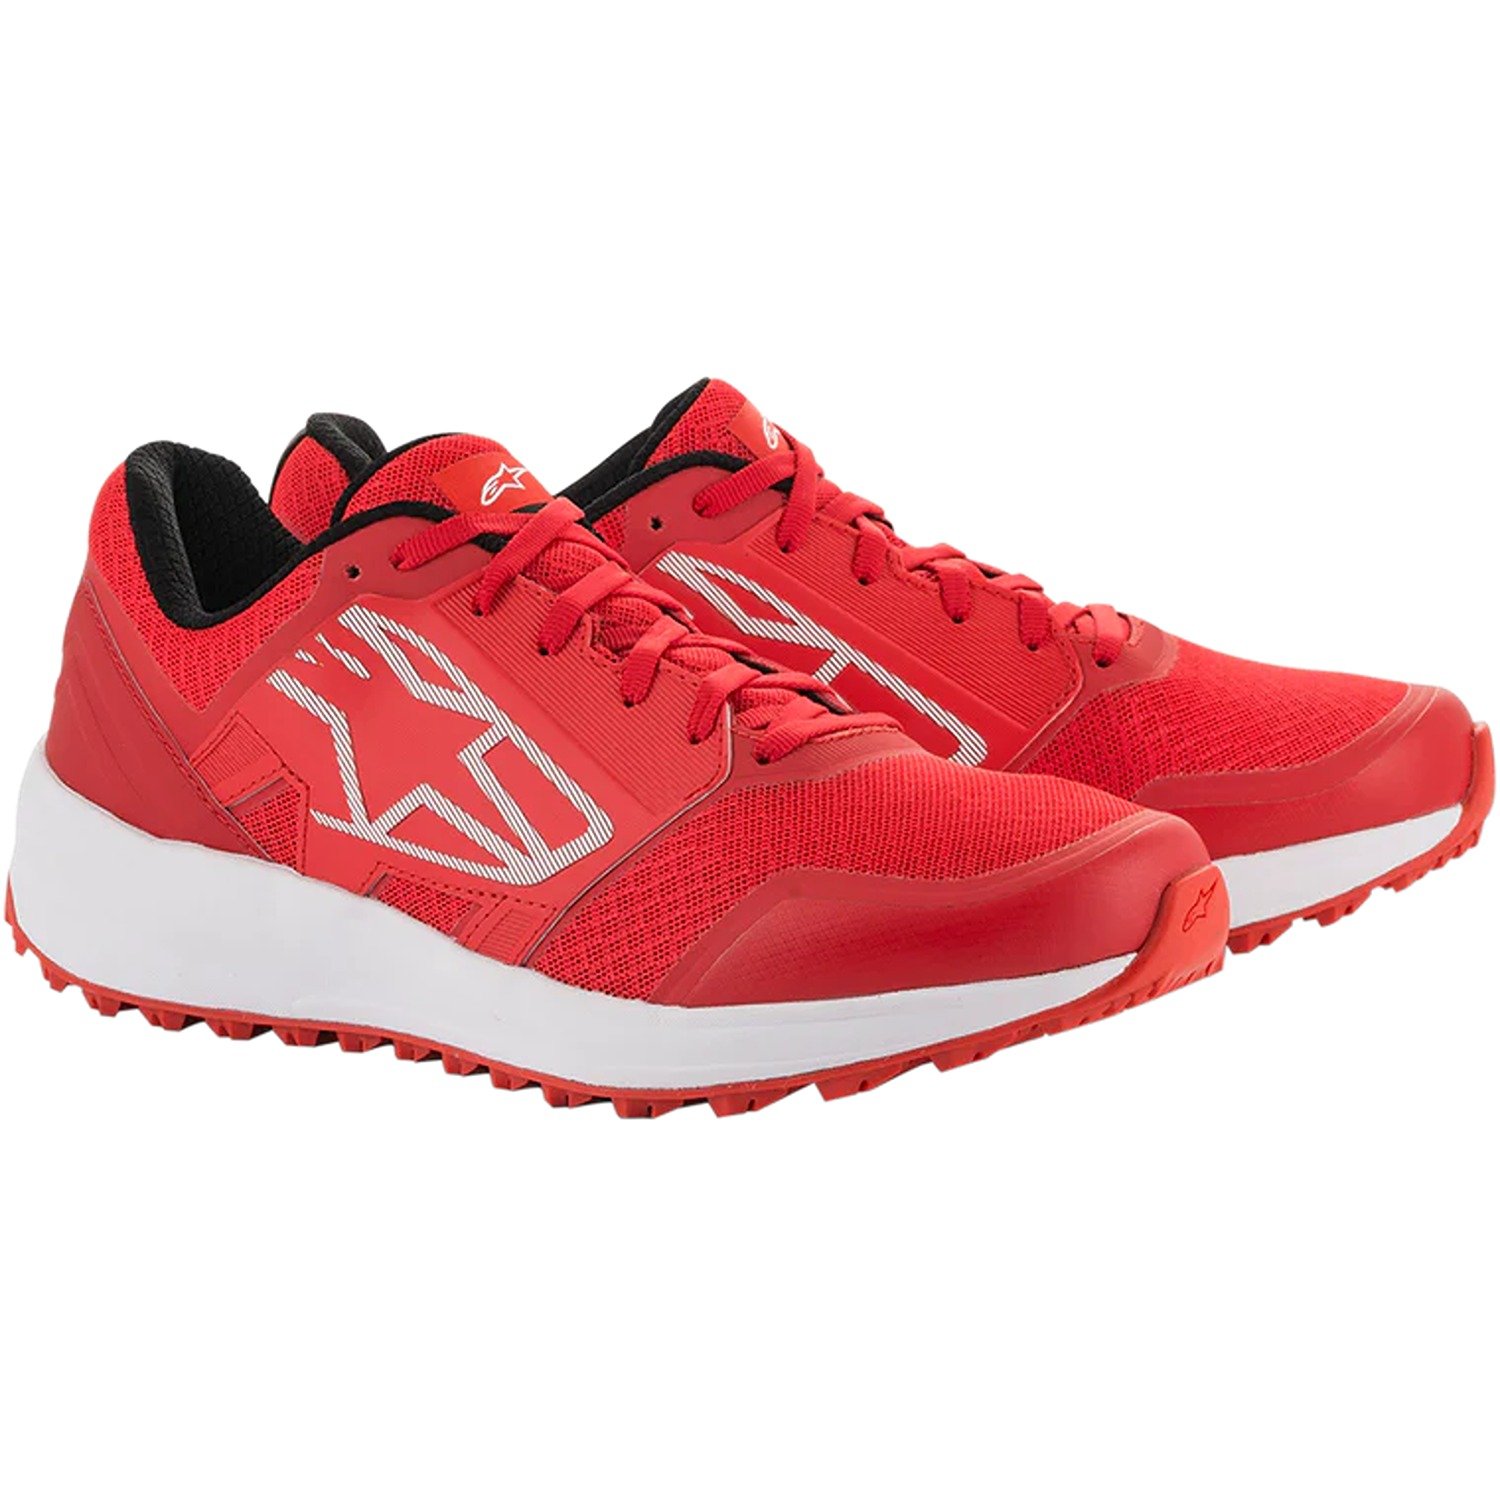 Image of Alpinestars Meta Trail Shoes Red White Size US 9 ID 8059175086496